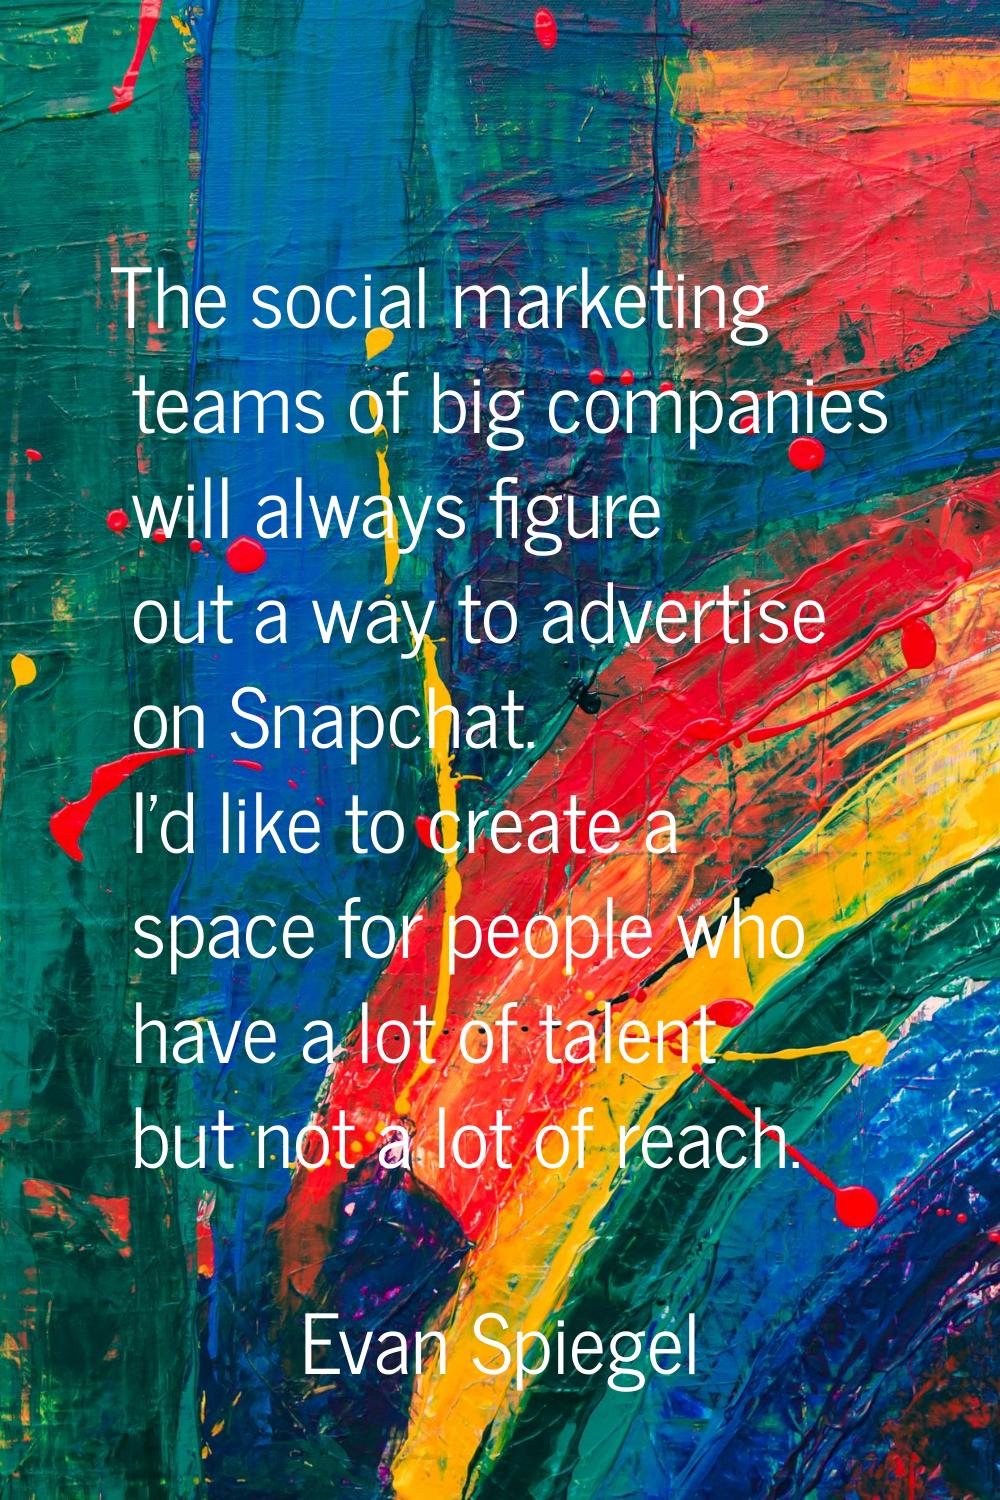 The social marketing teams of big companies will always figure out a way to advertise on Snapchat. 